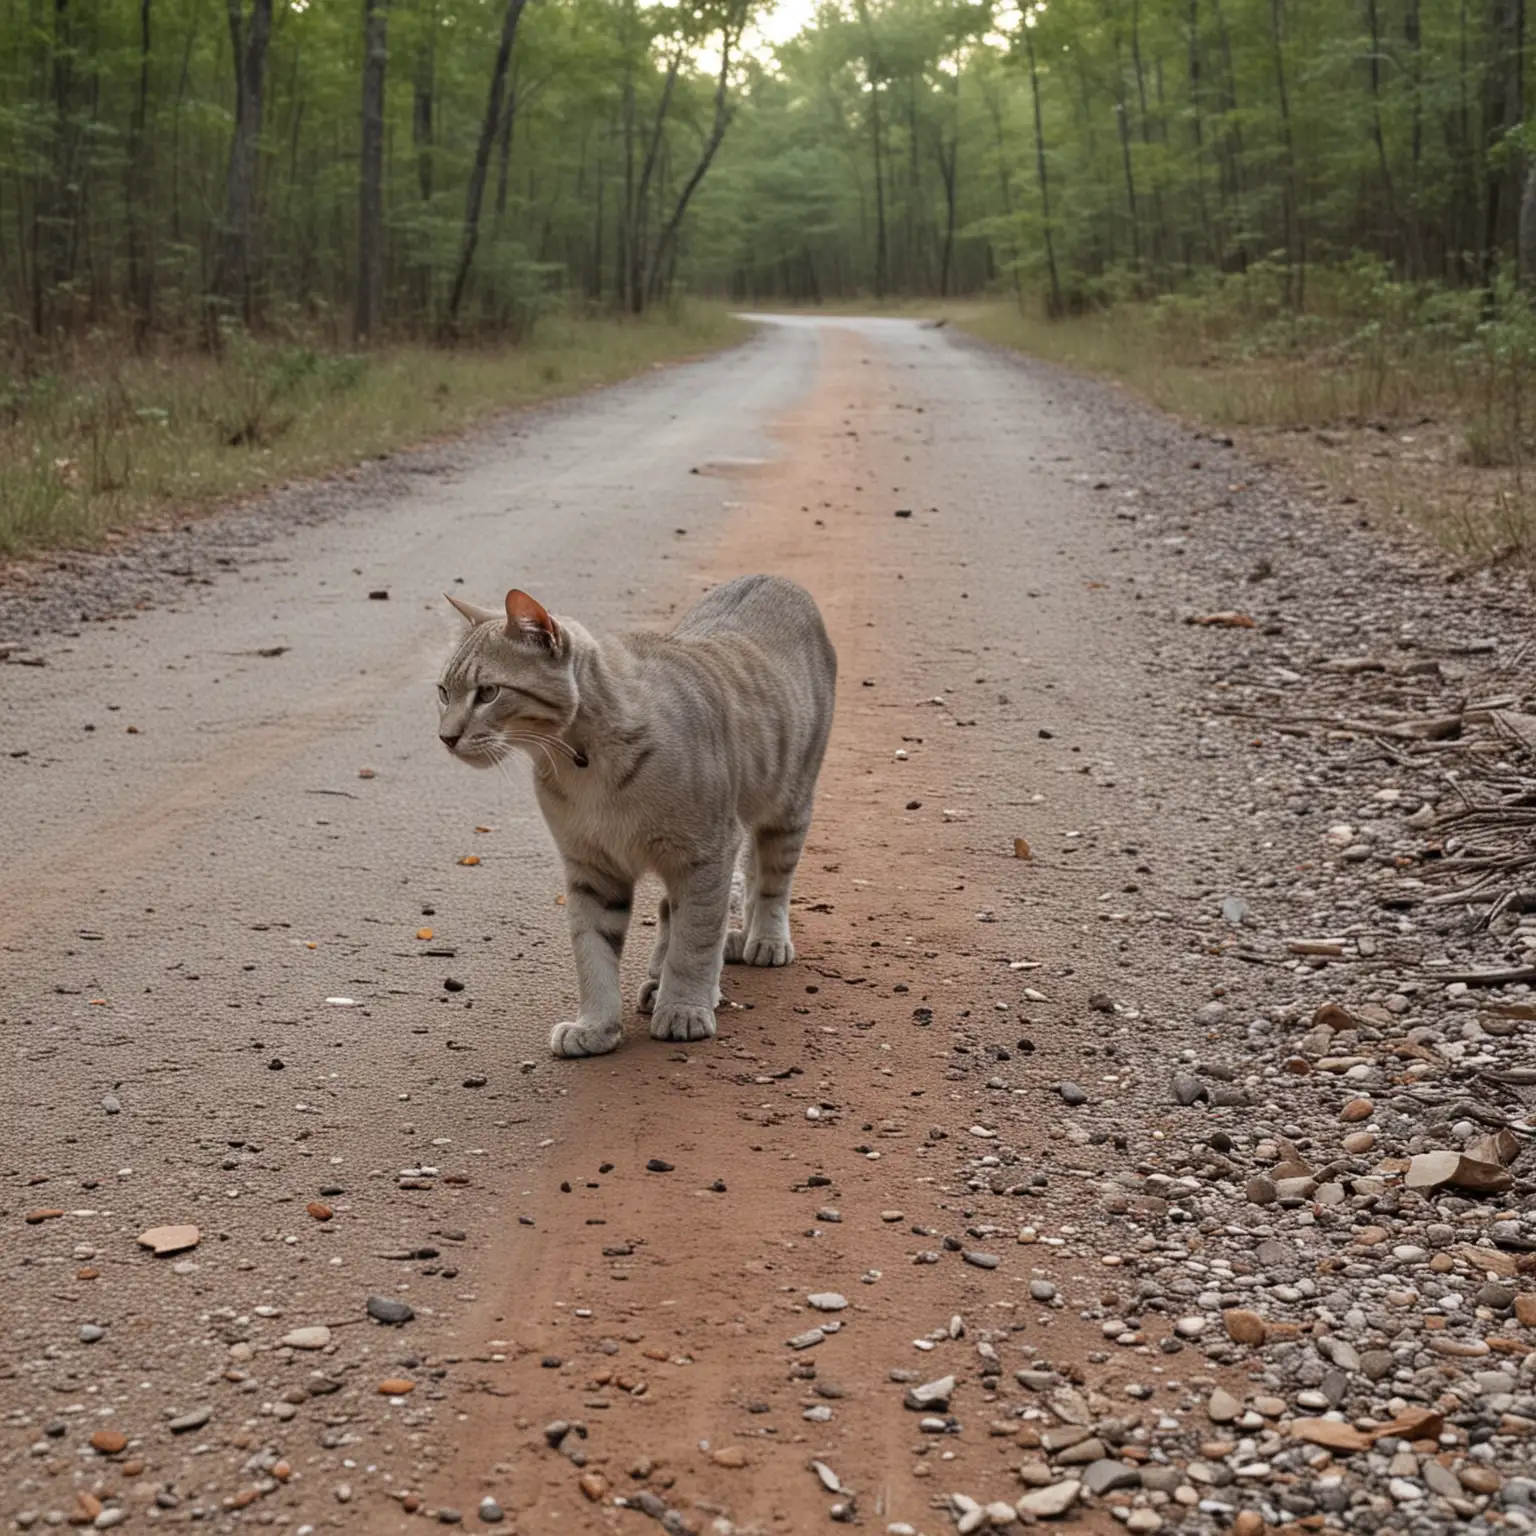 Mysterious Encounter Wampus Cat on a Deserted Dirt Road in an Arkansas Forest